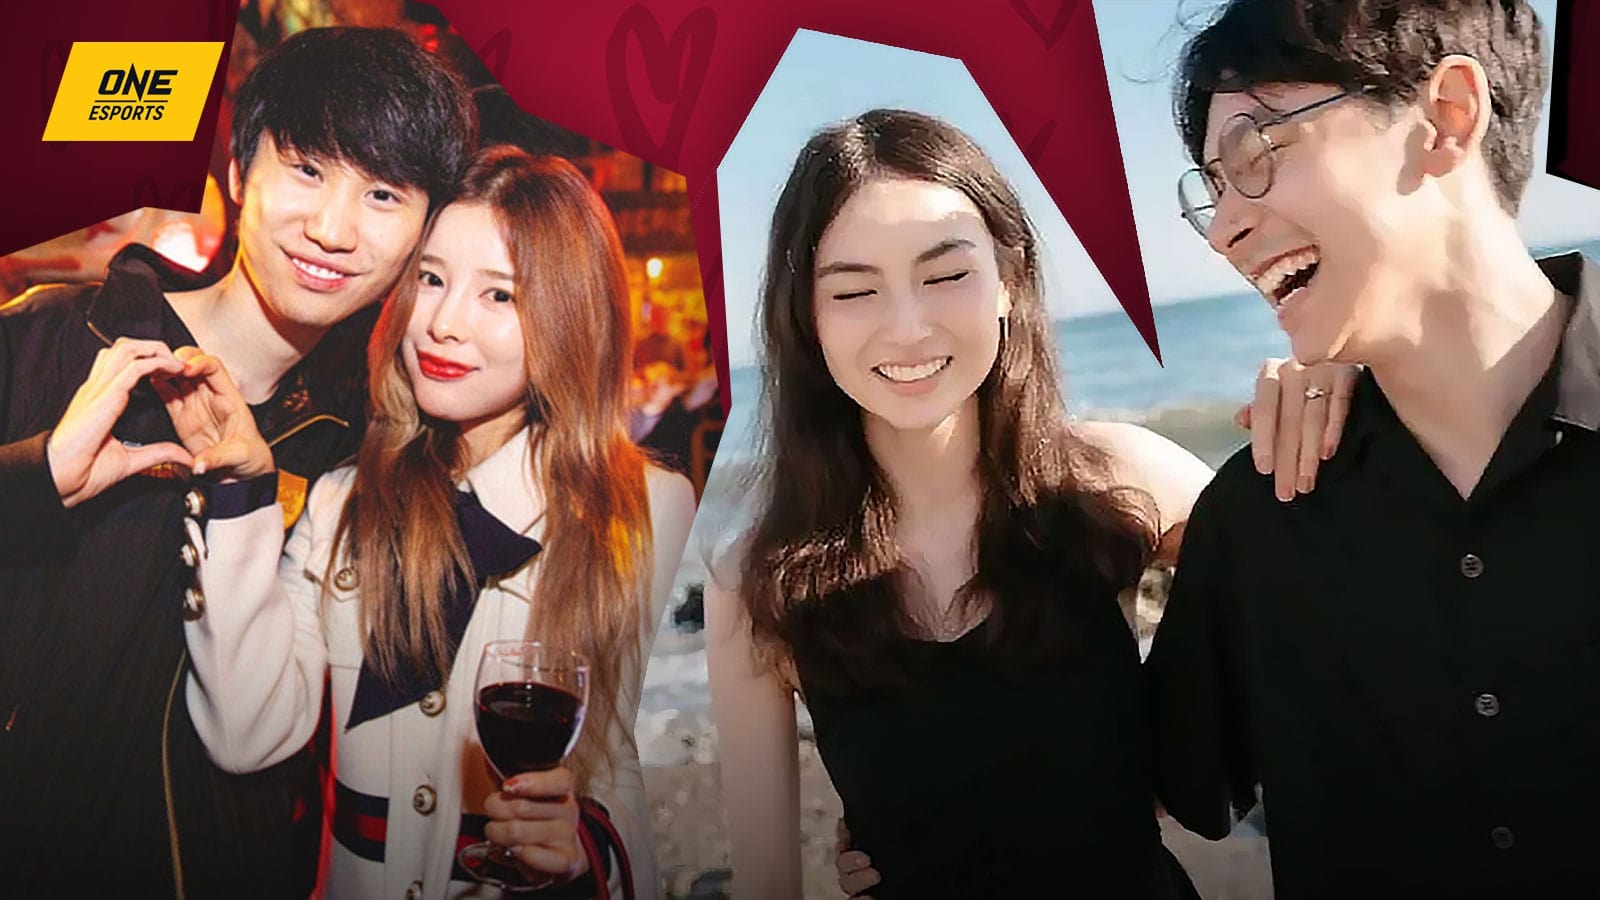 5 esports couples that make us believe in true love again | ONE Esports